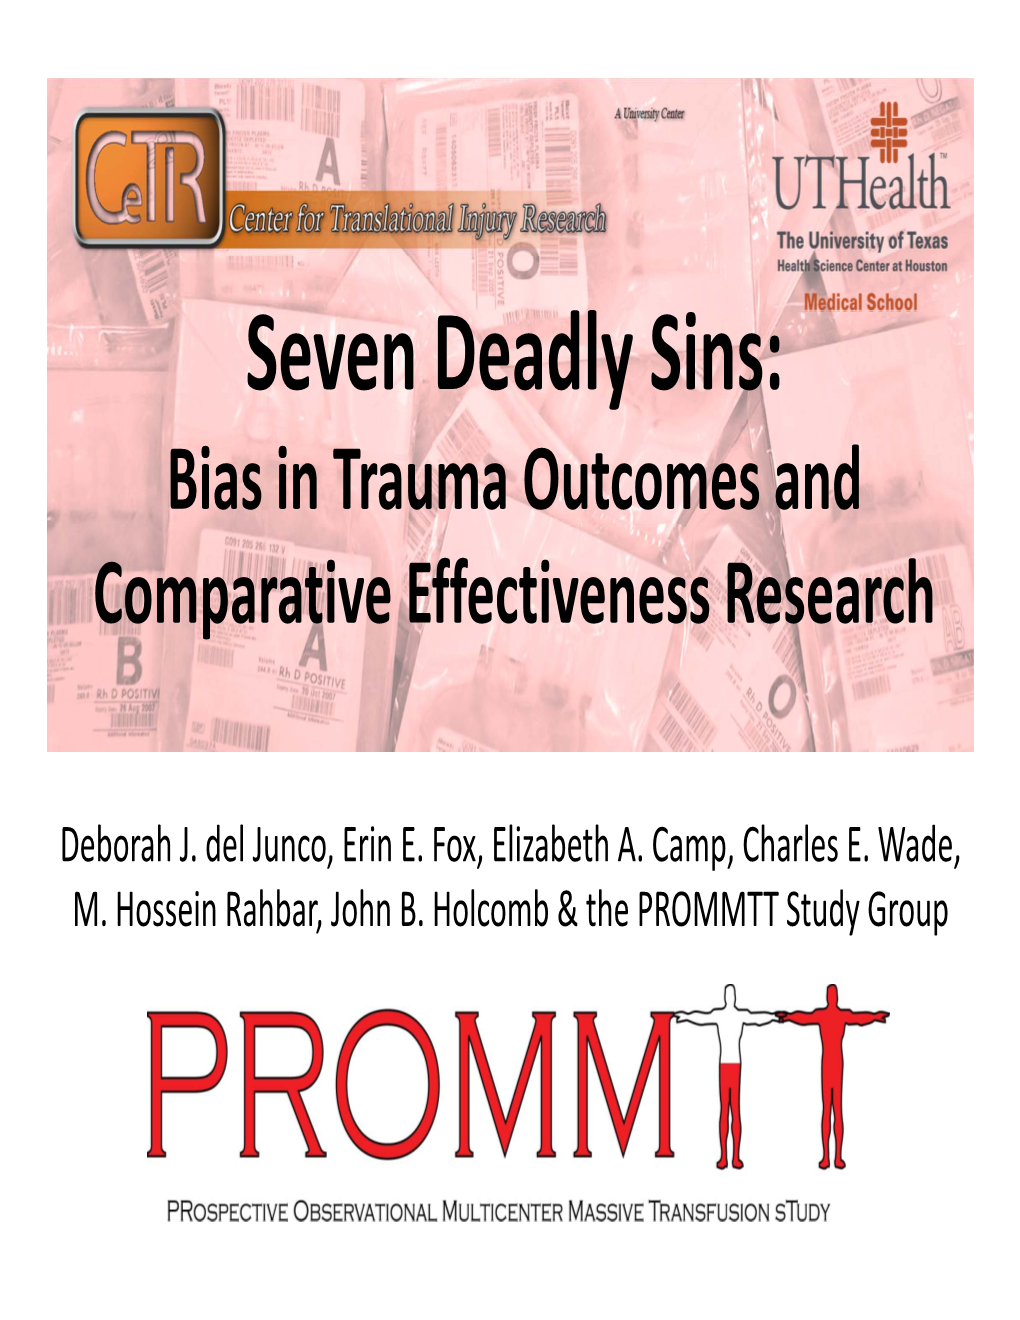 Seven Deadly Sins: Bias in Trauma Outcomes and Comparative Effectiveness Research